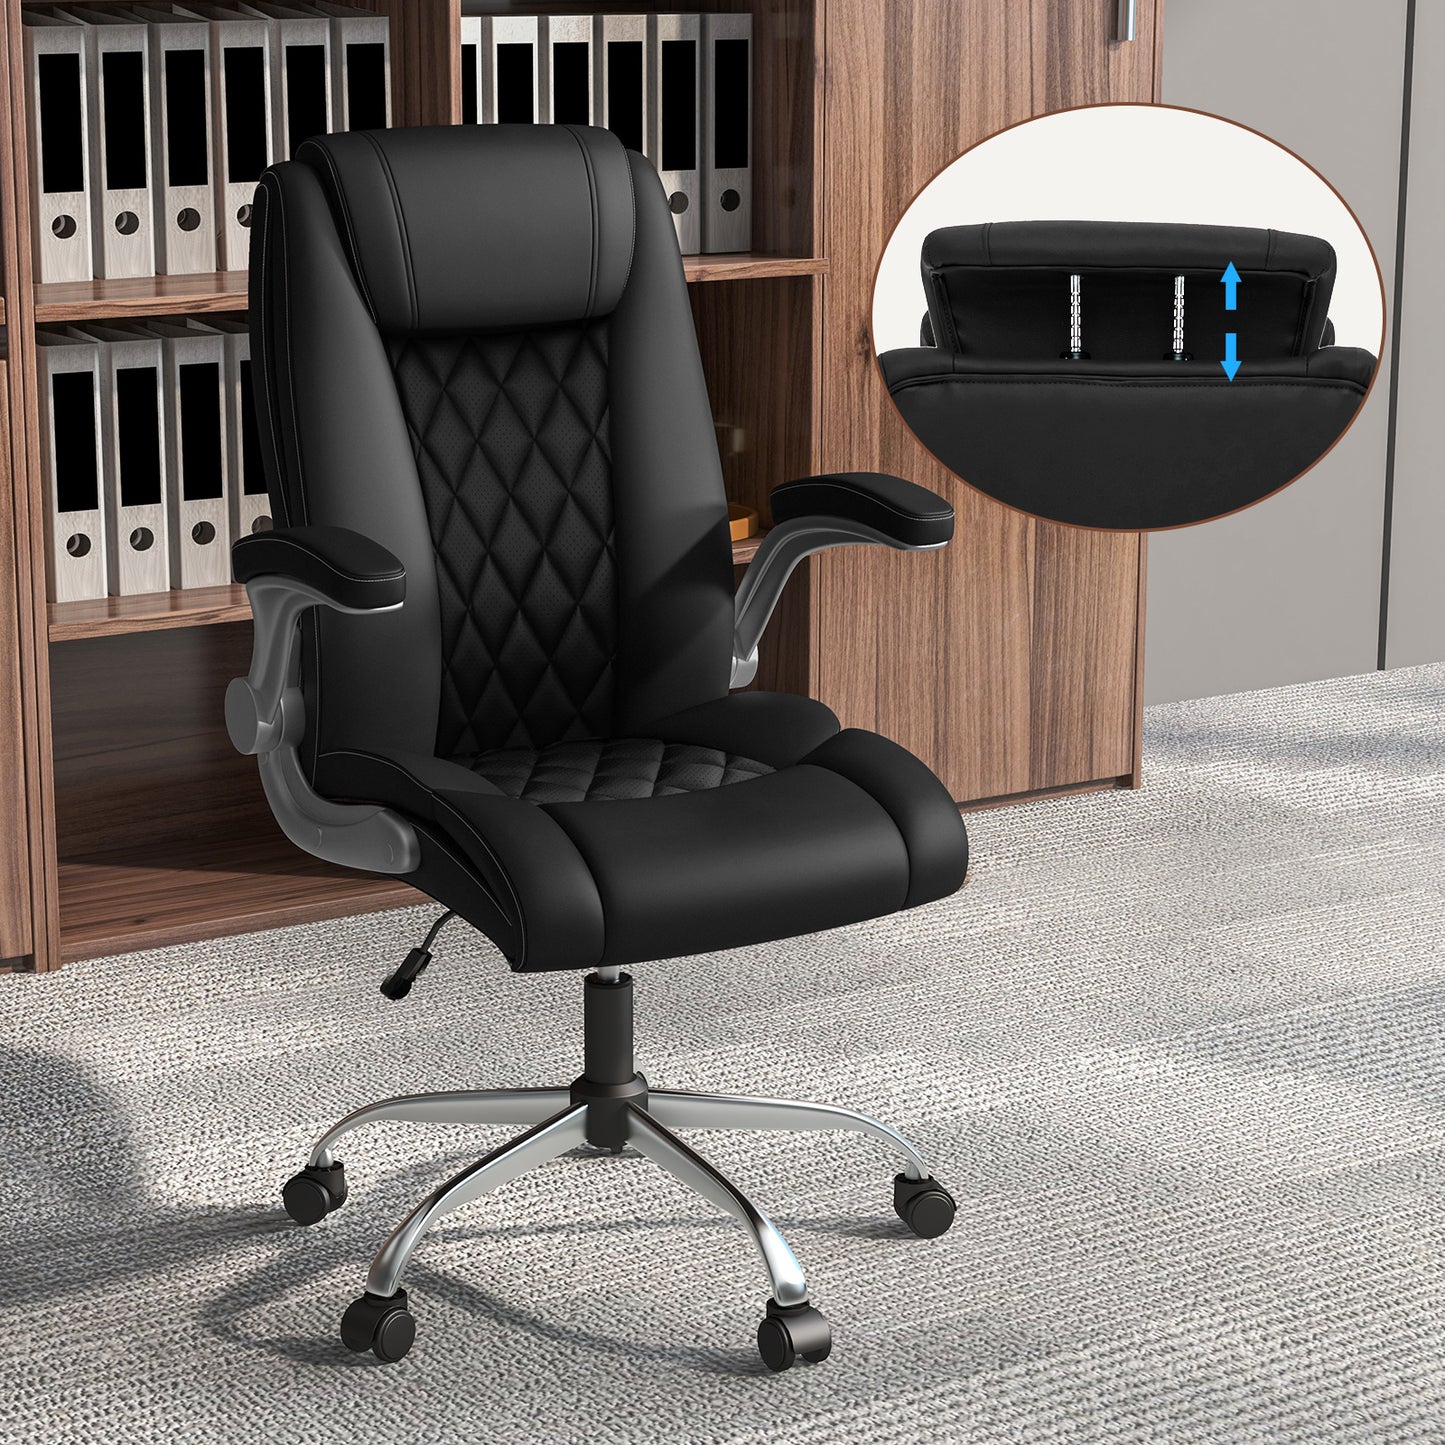 Modern Height Adjustable PU Leather Office Chair with Rocking Function-Black